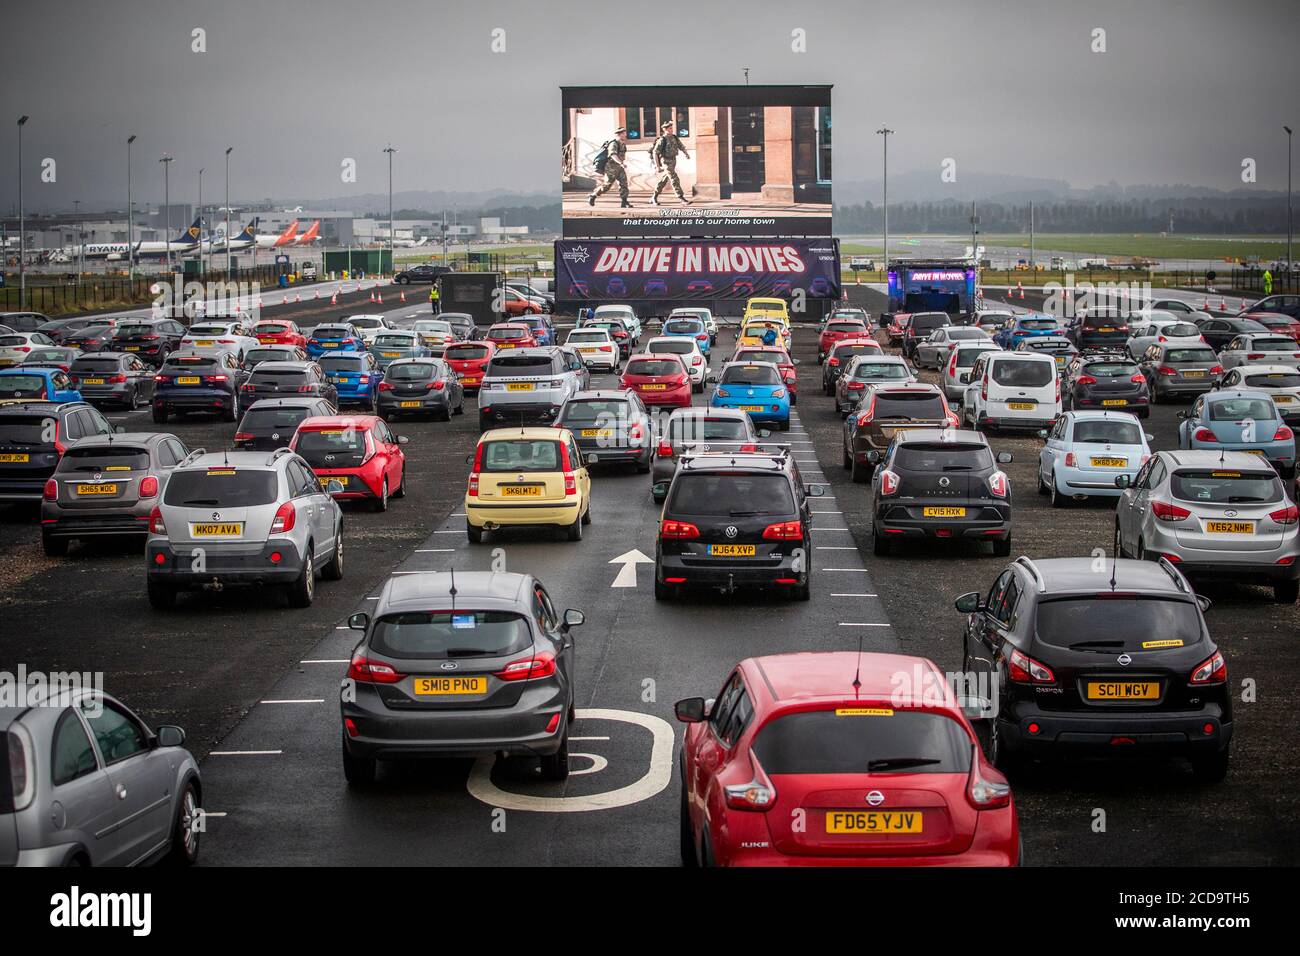 Movie-goers watch the film Sunshine On Leith in their cars at the socially distanced Drive-in Movie arena which has been set up at Edinburgh Airport as part of the Edinburgh International Film Festival. Stock Photo